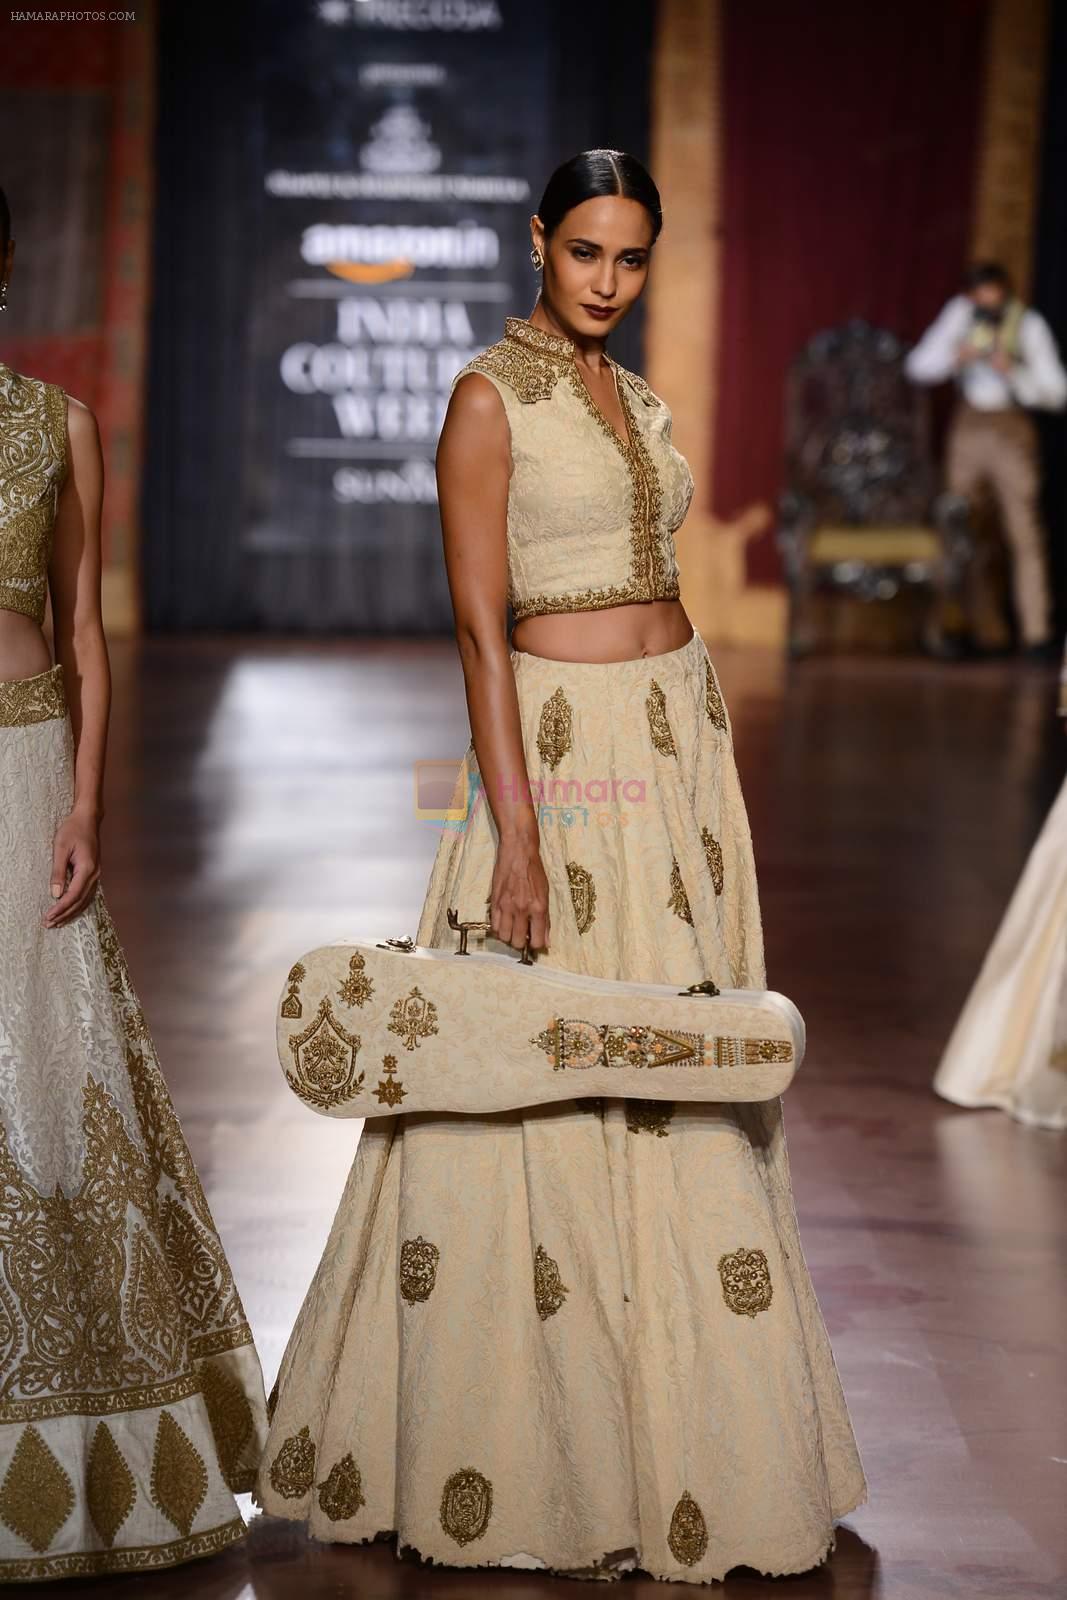 Model walk for Harpreet and Rimple Narula Show at India Couture Week 2015 on 1st Aug 2015